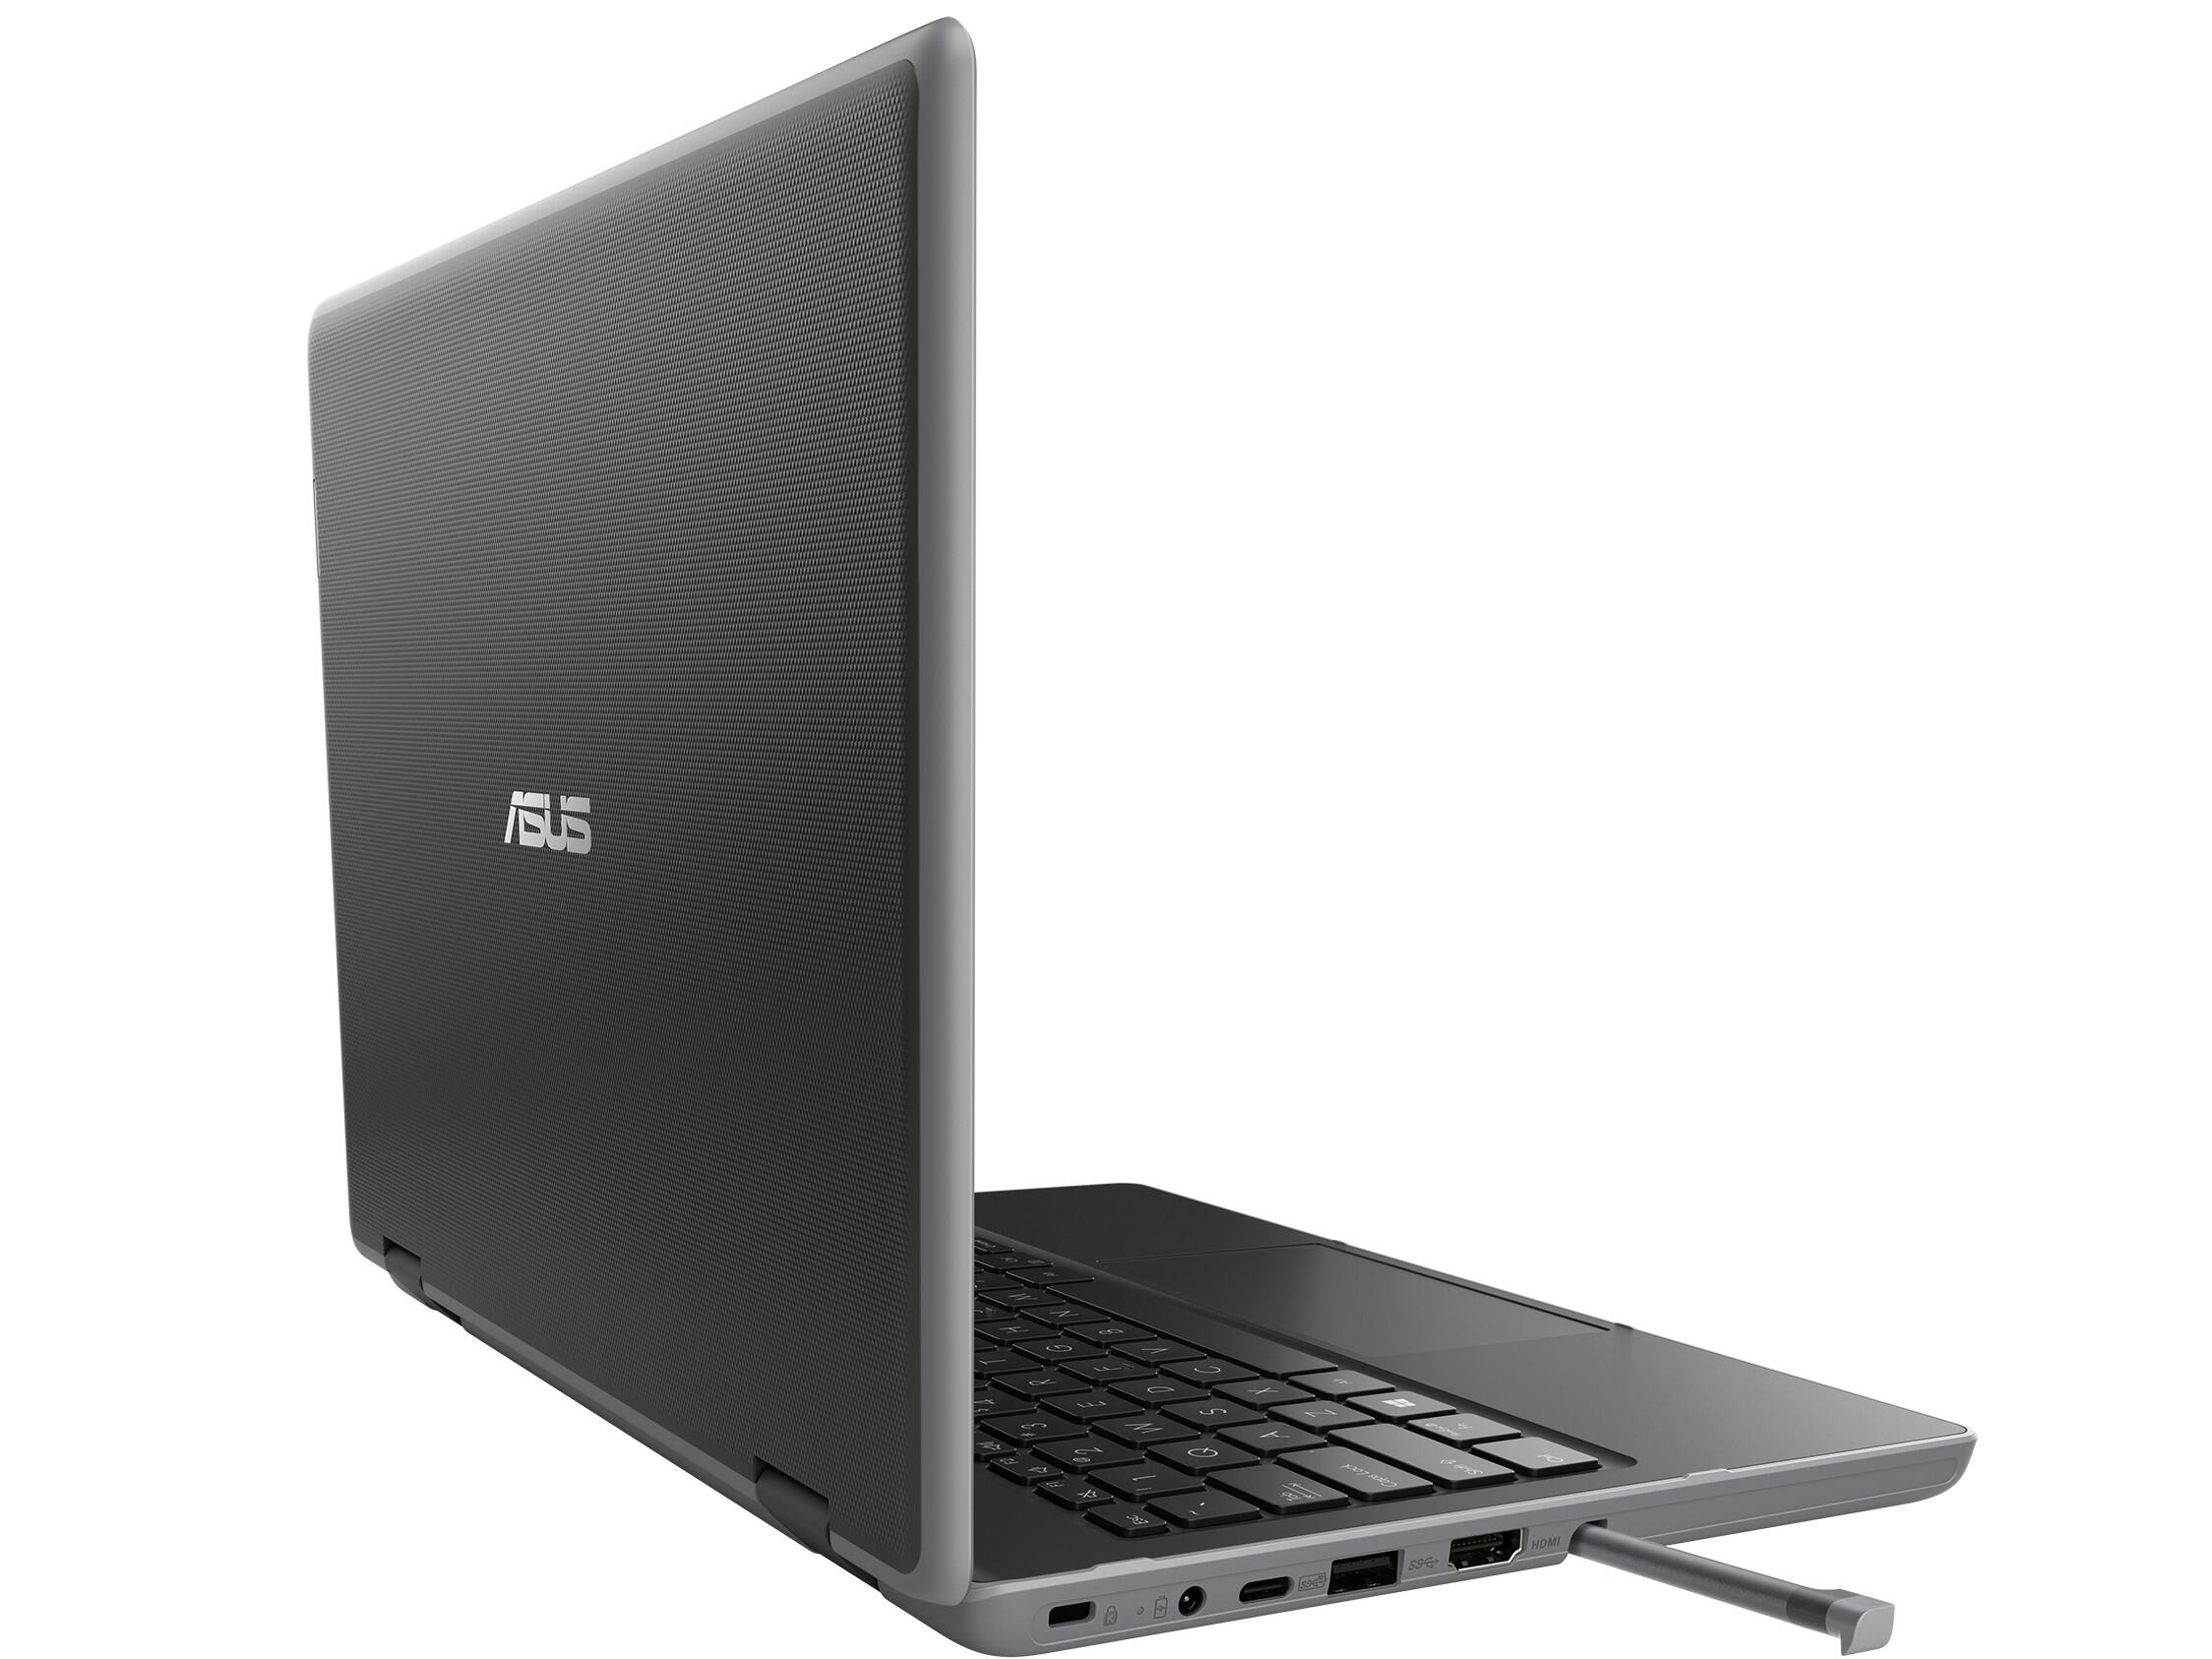 asus-br1100f-product-photo-1a-dark-grey-29-with-pen-2000x2000.jpg